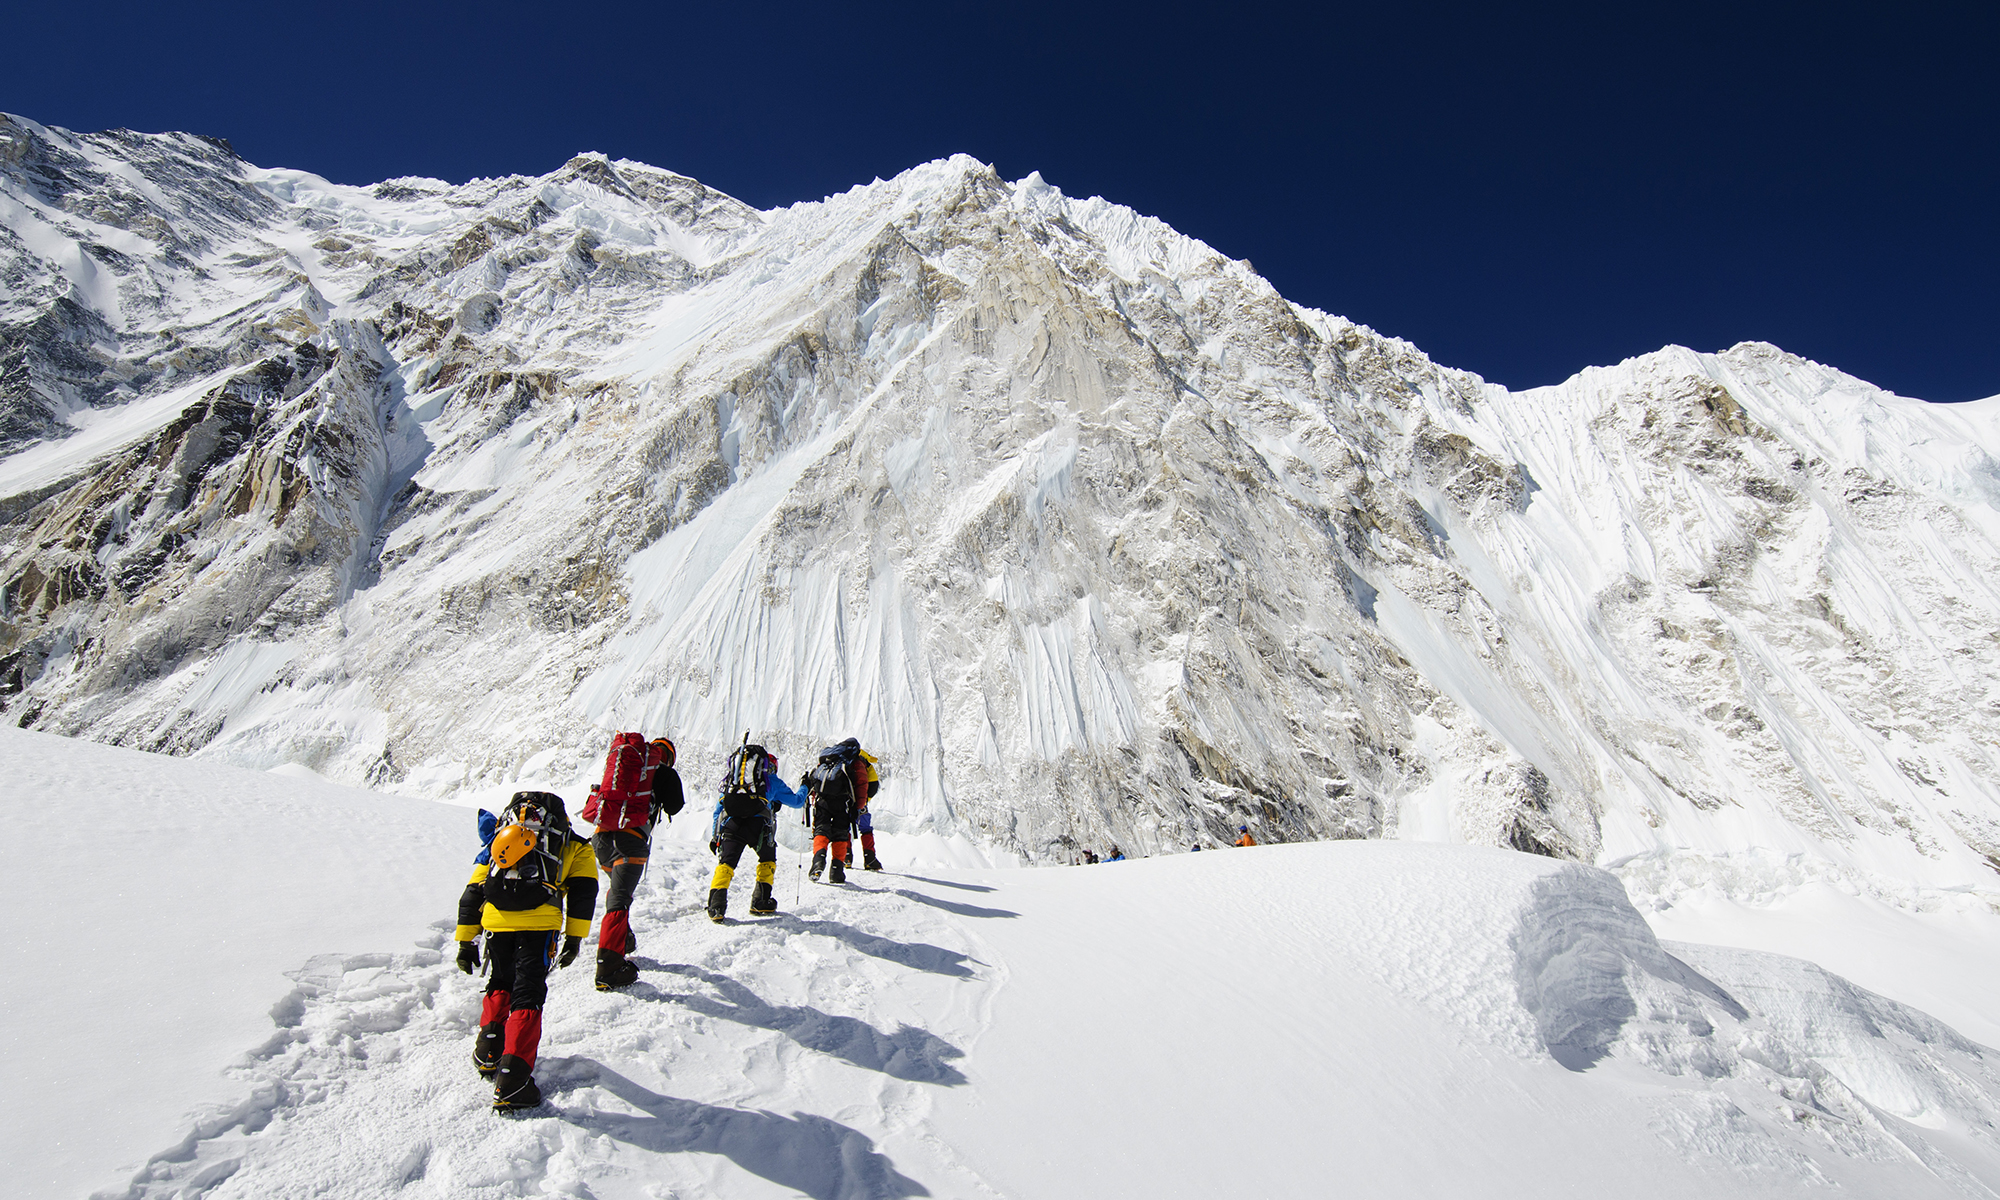 How has Mount Everest tourism affected Nepal? | HowStuffWorks